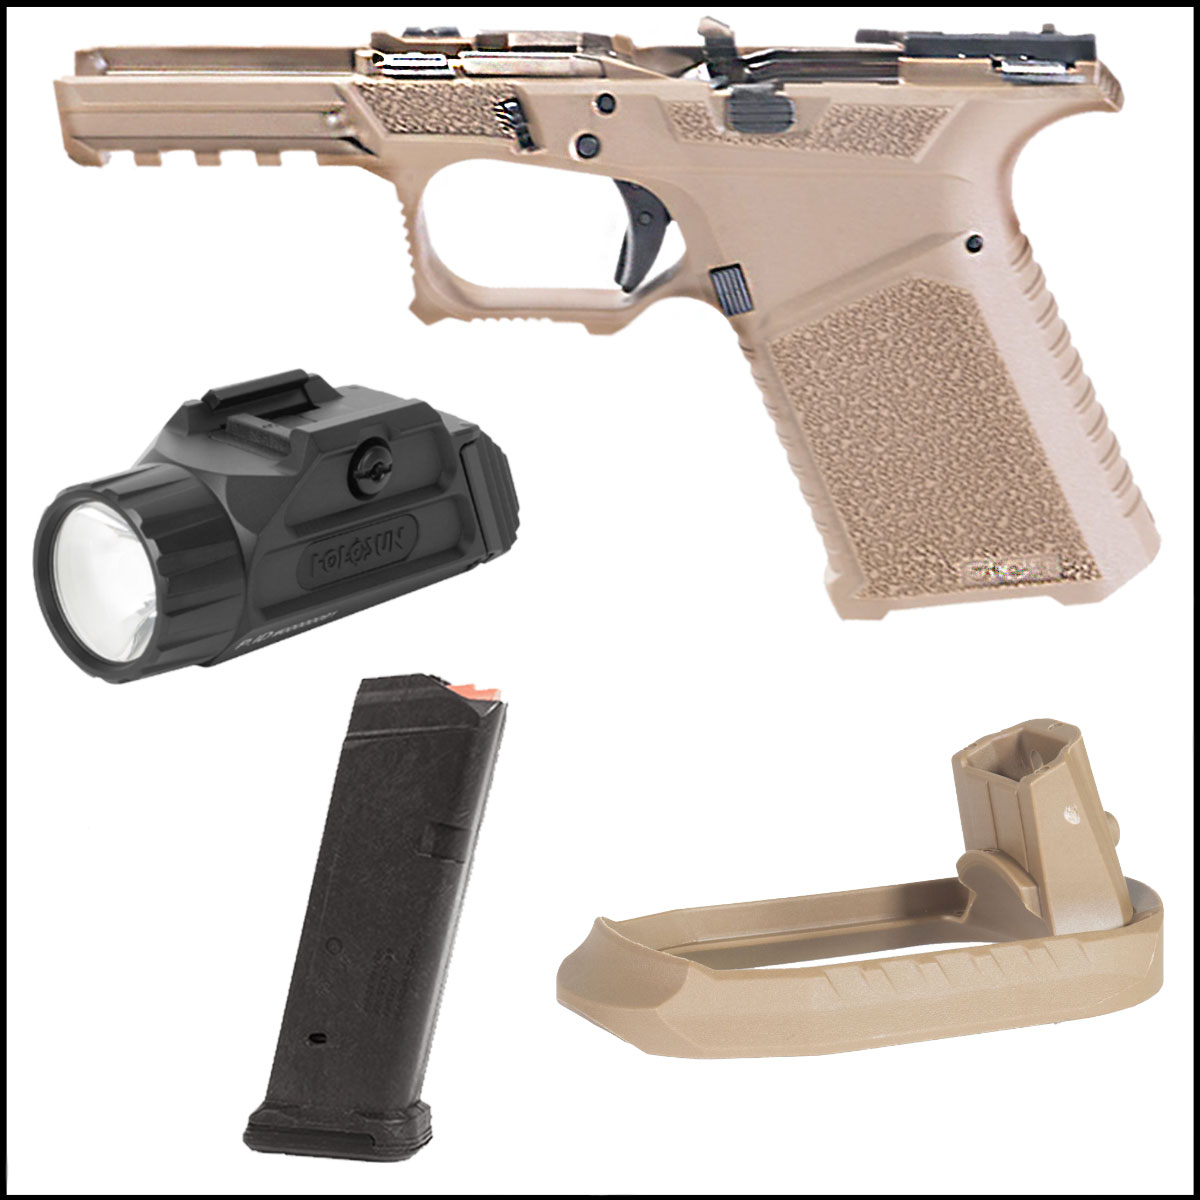 Light The Way Combo: SCT Manufacturing Full Frame Assembly - FDE  + SCT Manufacturing Magwell for SCT19 Frame + Magpul PMAG 15 GL9, G19 Compatible, 15 Round Capacity, Black  + Holosun H-SUN P.ID Light 1000 Lumens